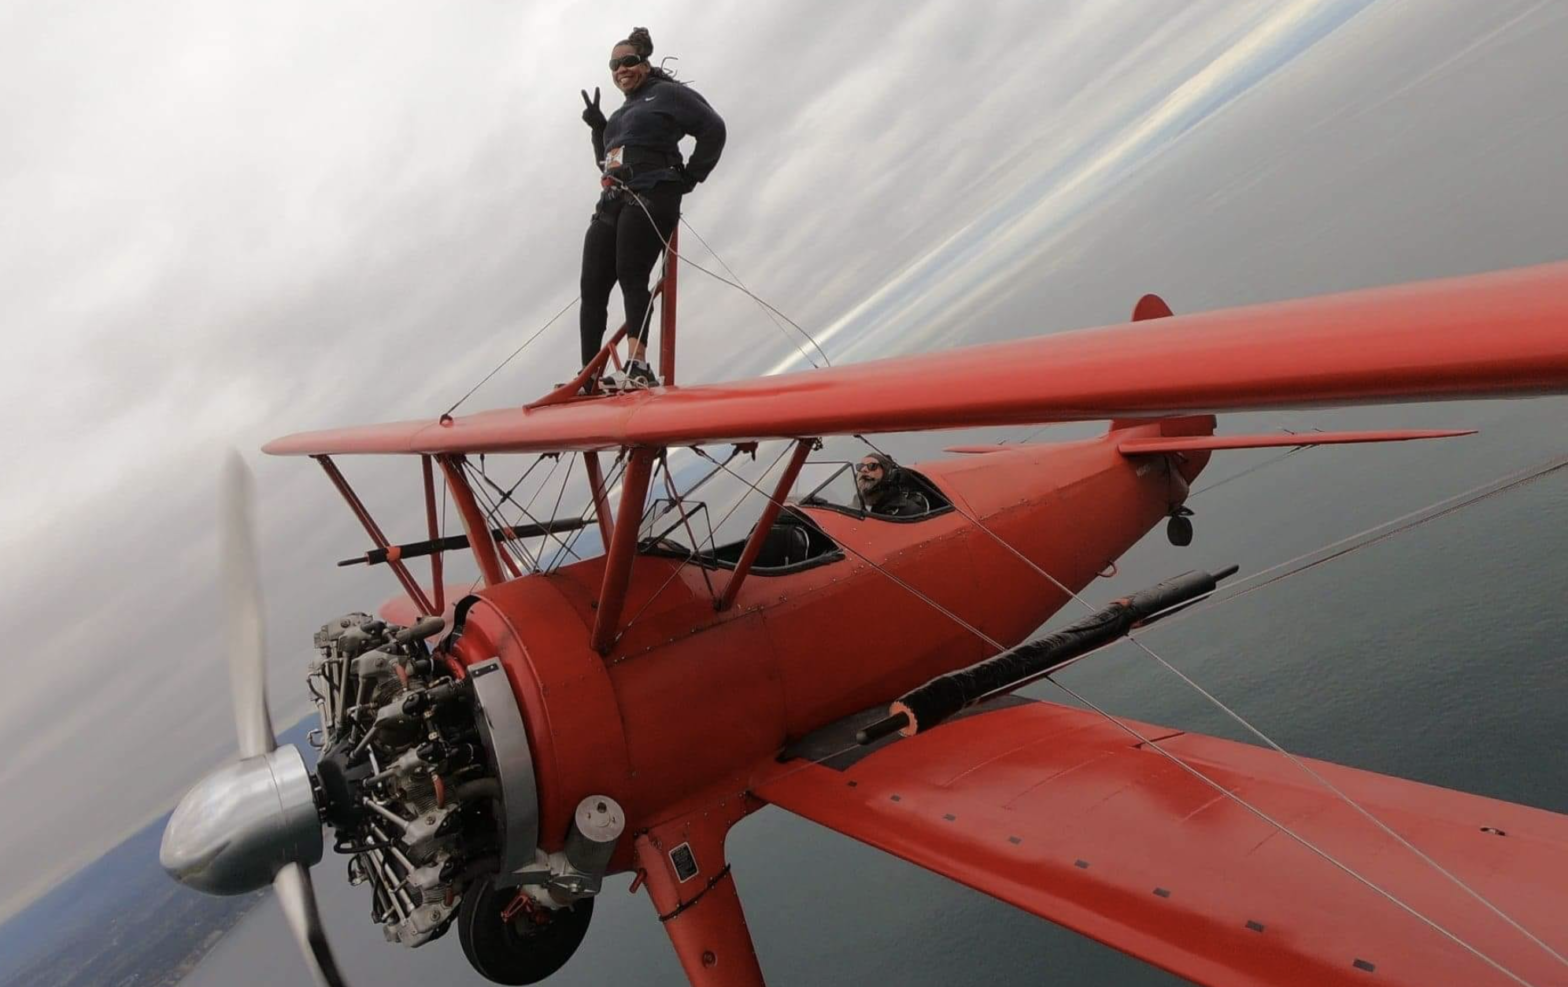 Traveler Story: 'Wing Walking Is Beyond Anything I Have Ever Experienced Before'